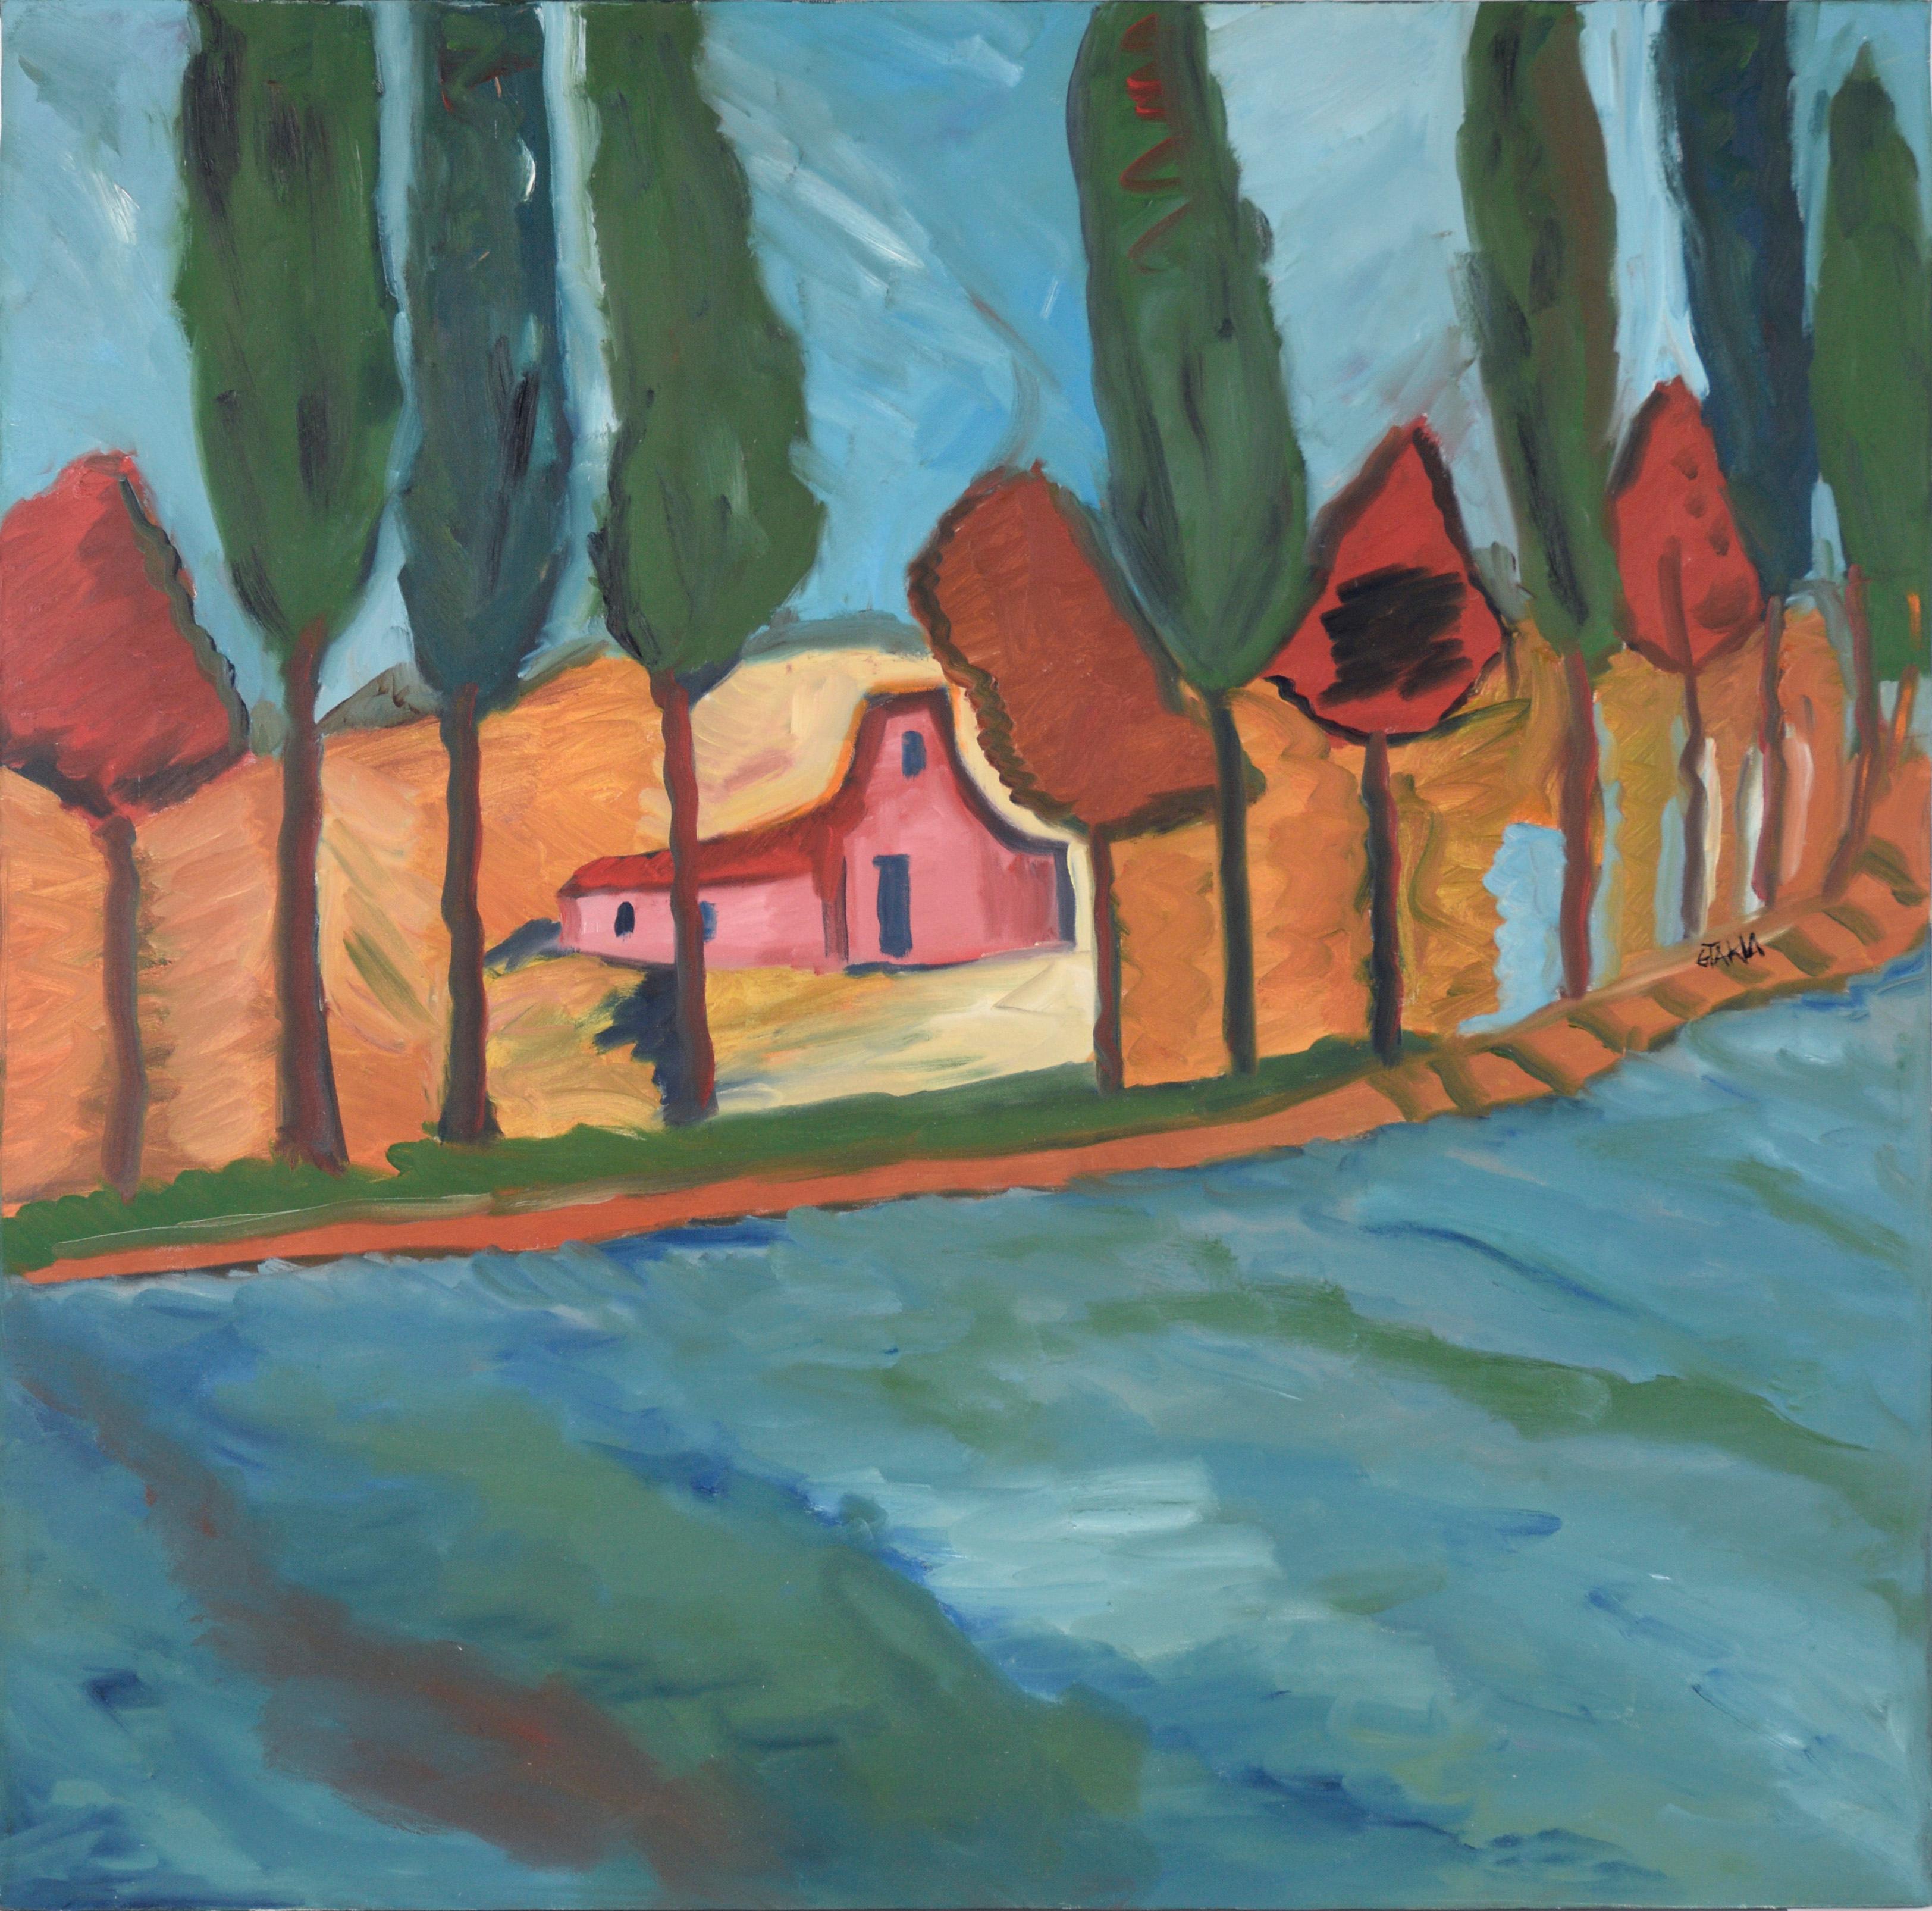 Gloria Takla Landscape Painting - Belgian Barn by the River - Expressionist Landscape Original Oil on Canvas